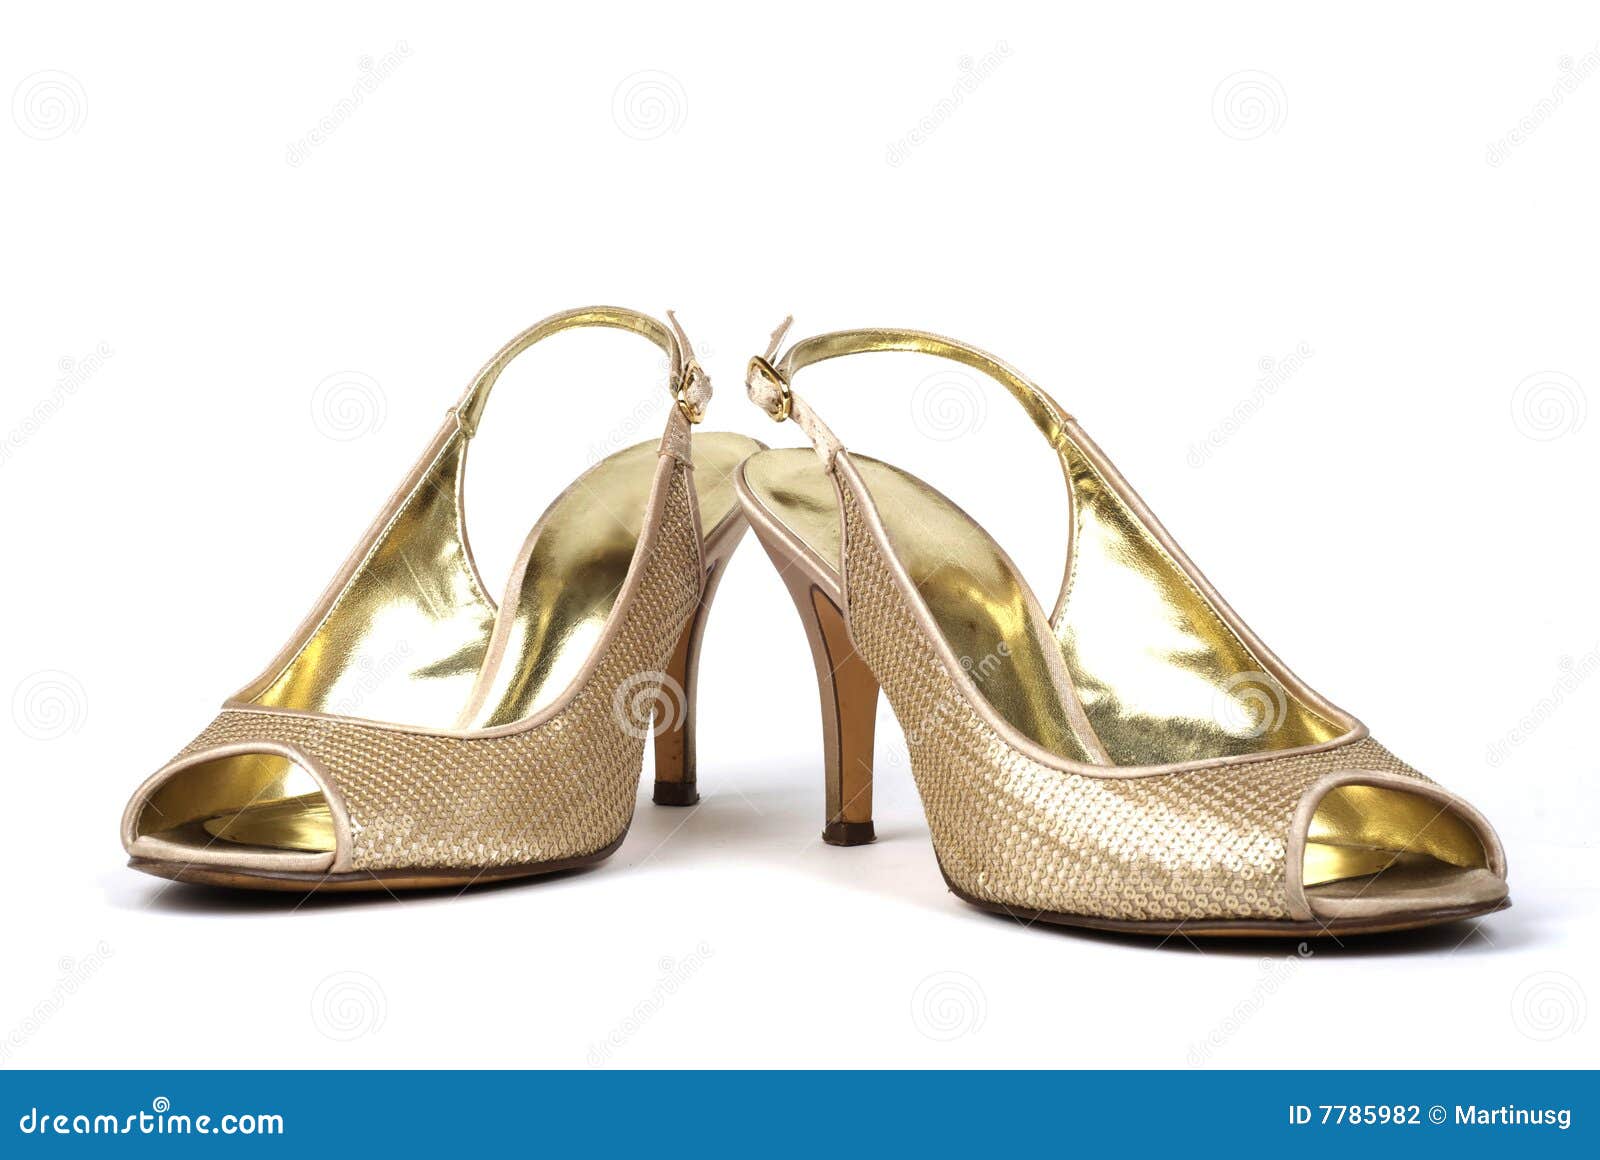 Gold Women's High-Heel Shoes Stock Photography - Image: 7785982